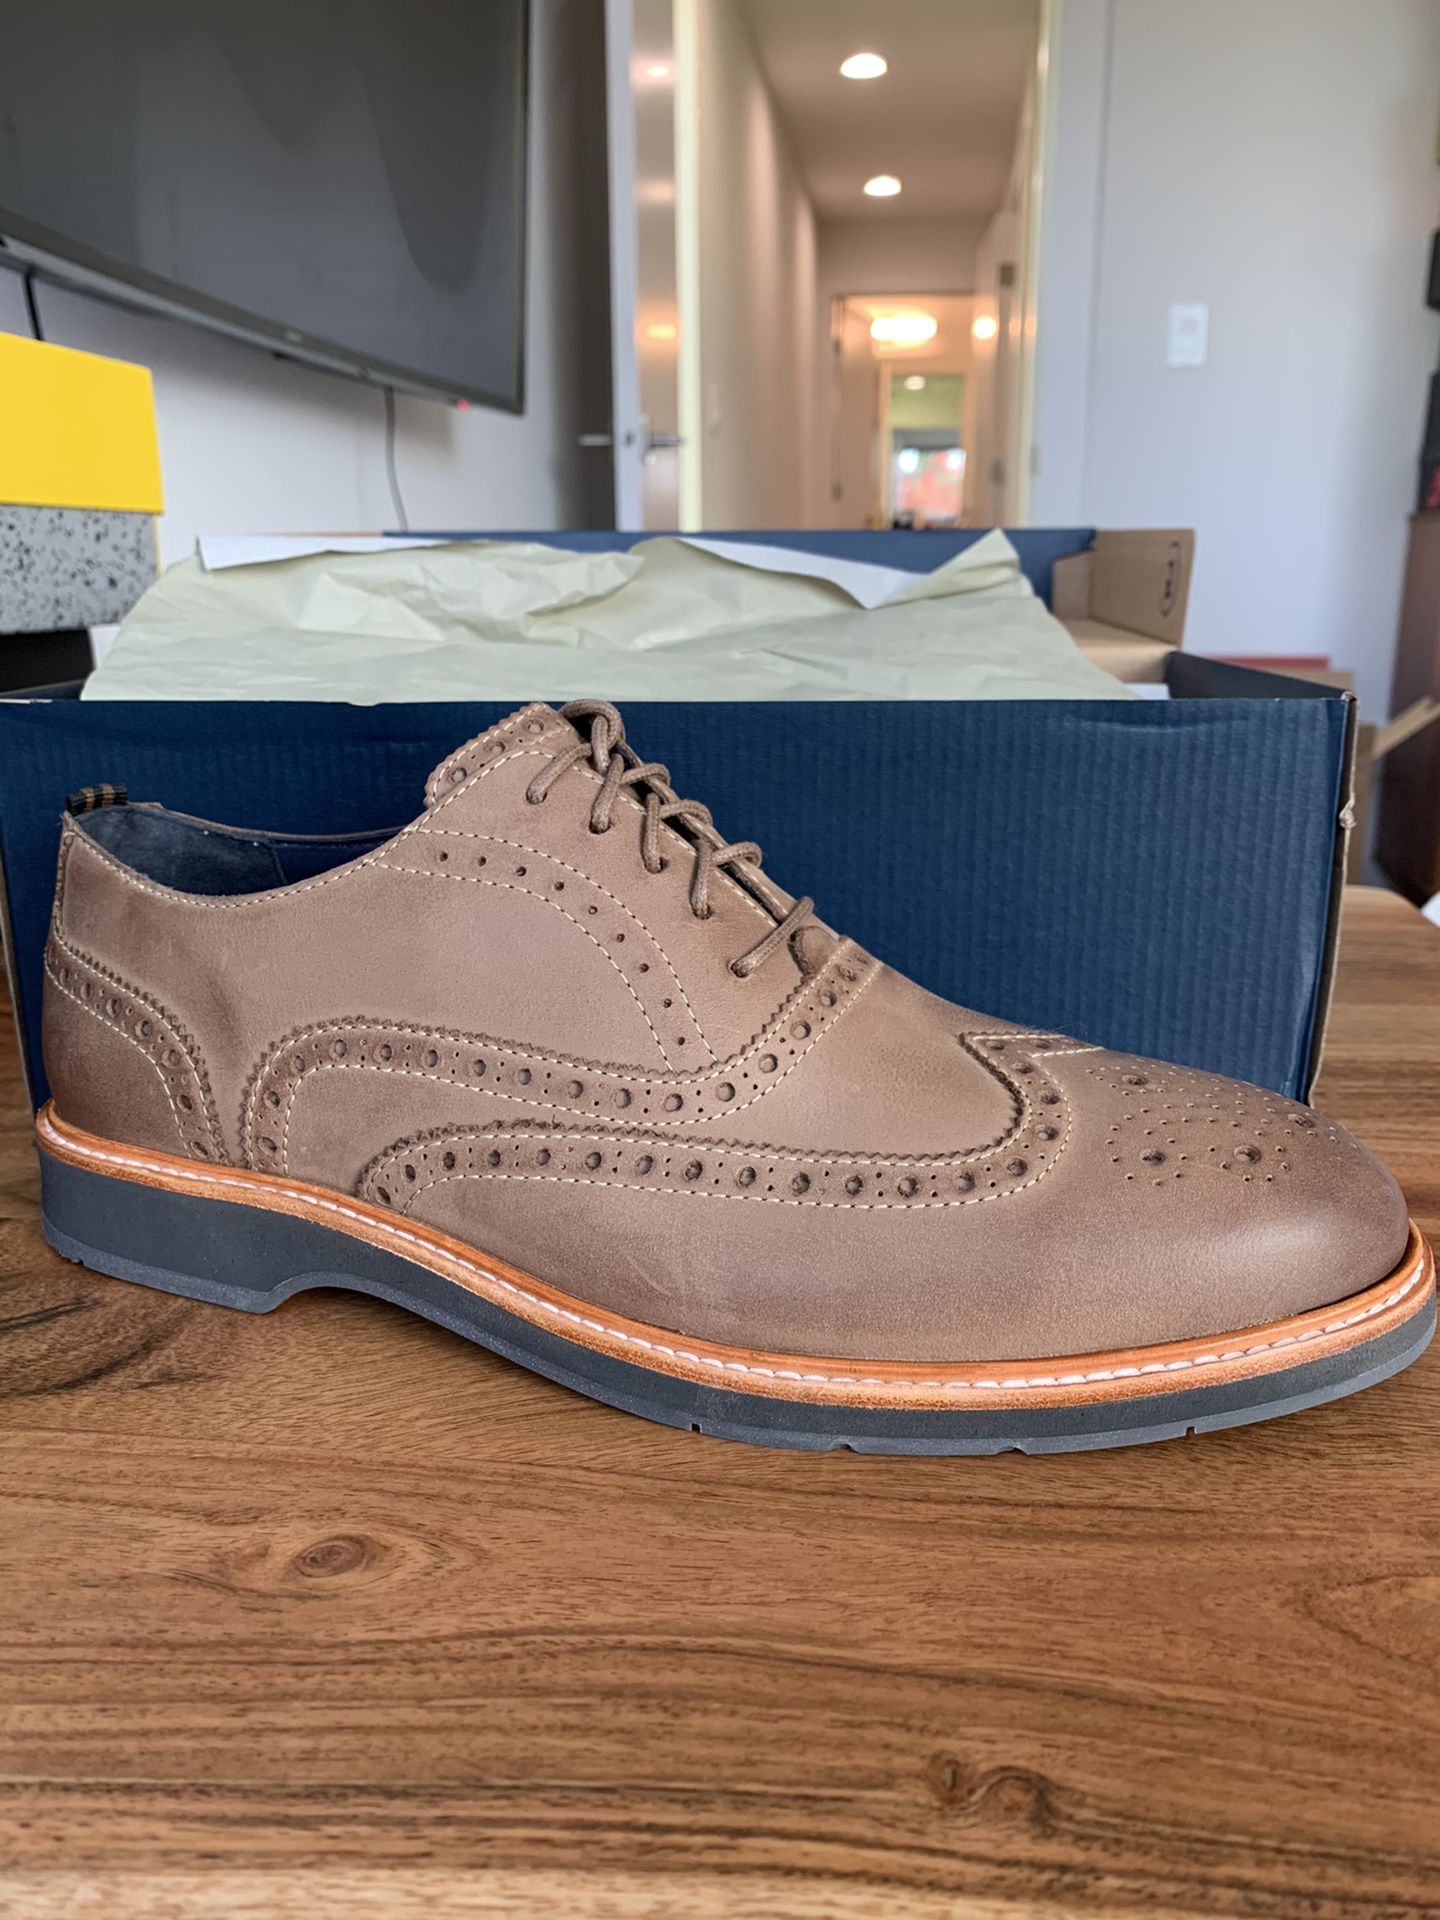 Cole Haan - Brand New dress shoes